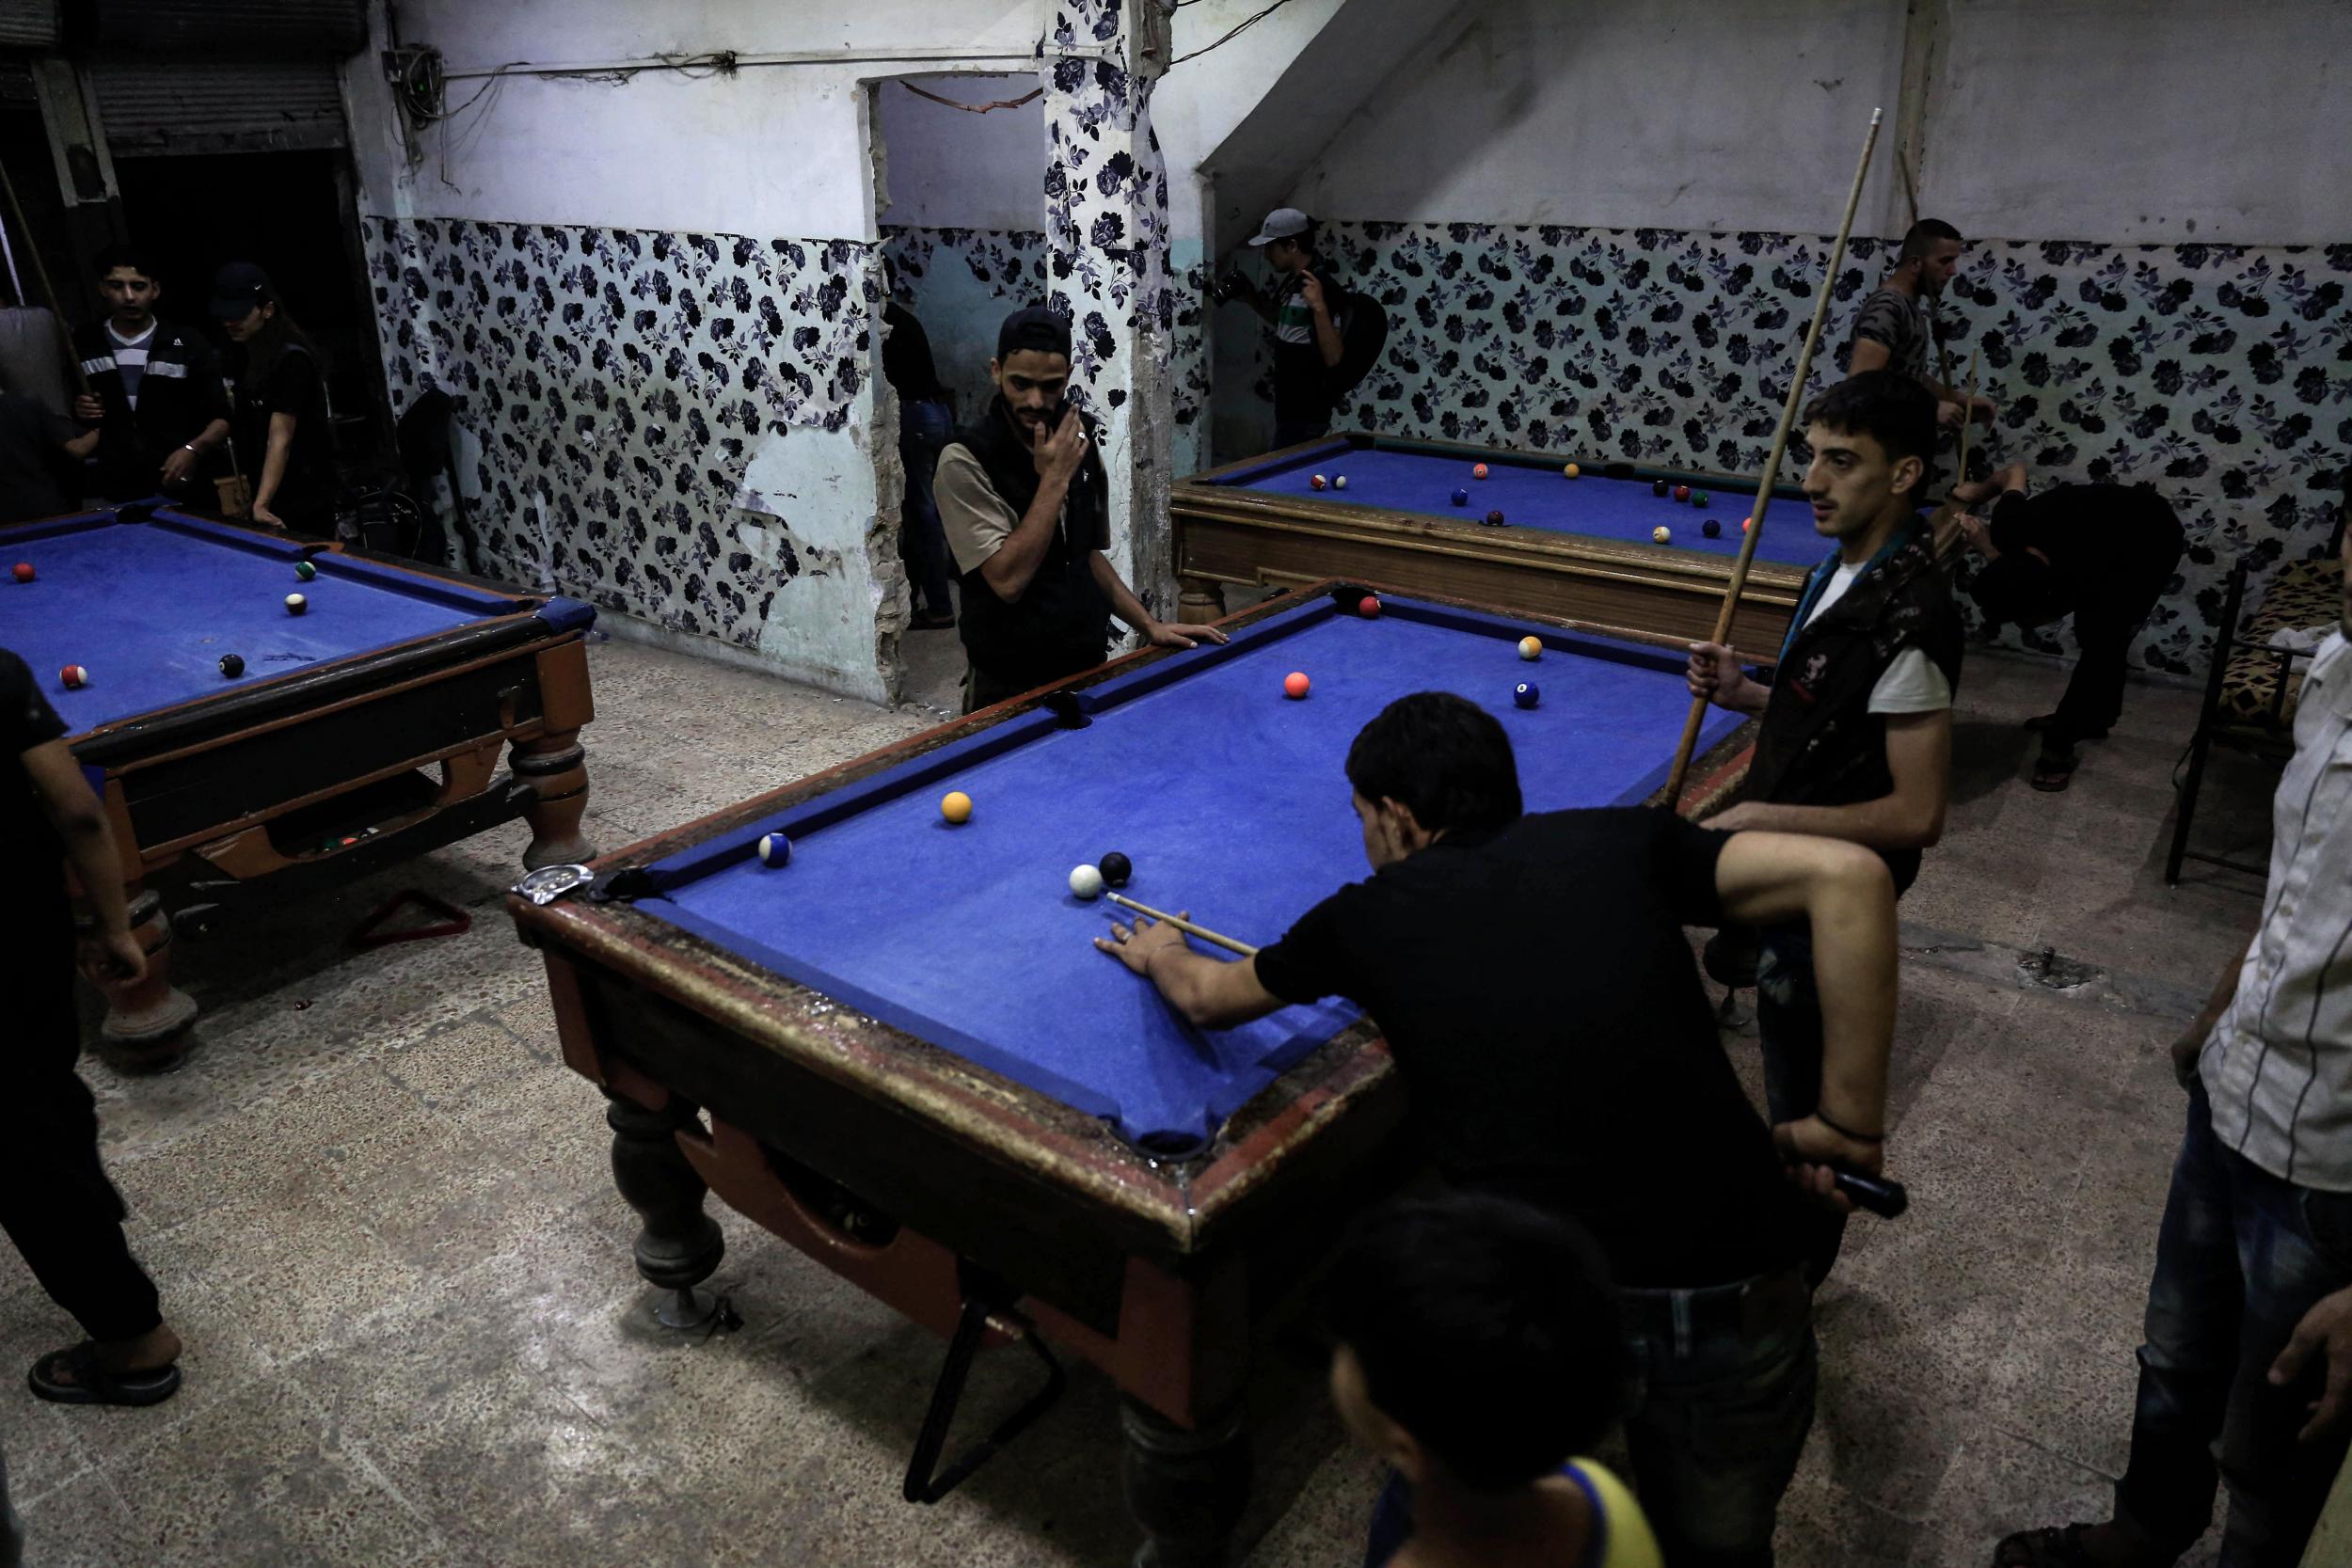 Syrians play pool at a games club in Syria's capital Damascus, rated the "least liveable" city in the world